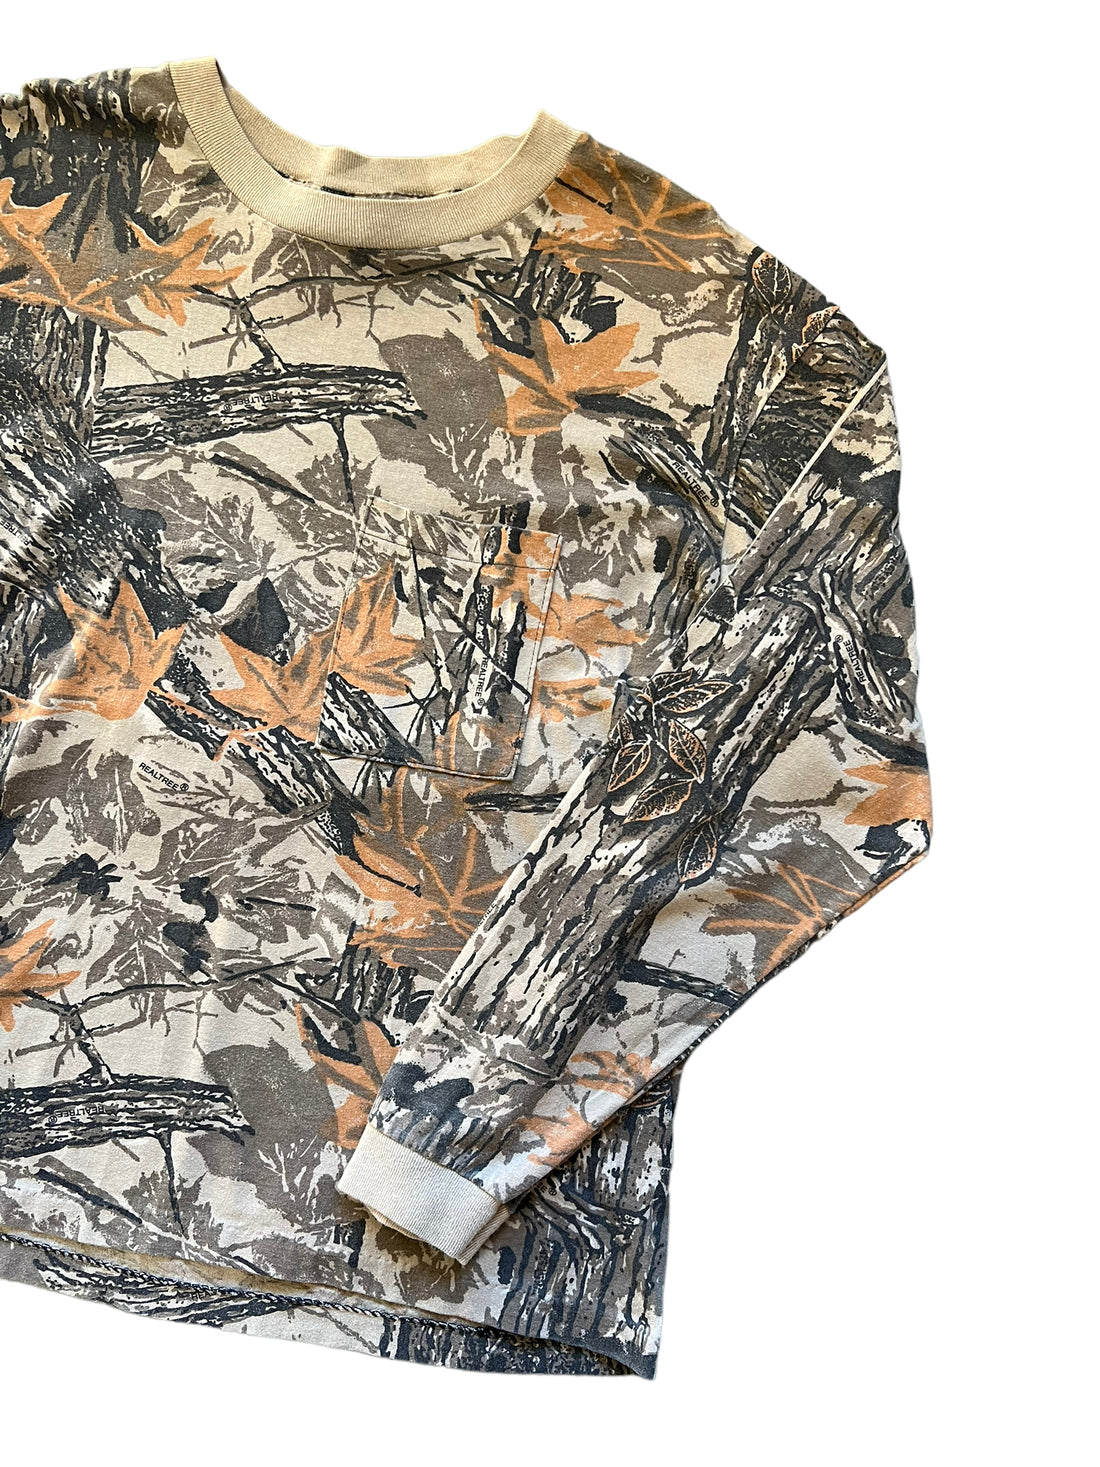 CABELA’S REAL TREE CAMO LONG SLEEVED T-SHIRT BROWN ‘XL’ - 1990S